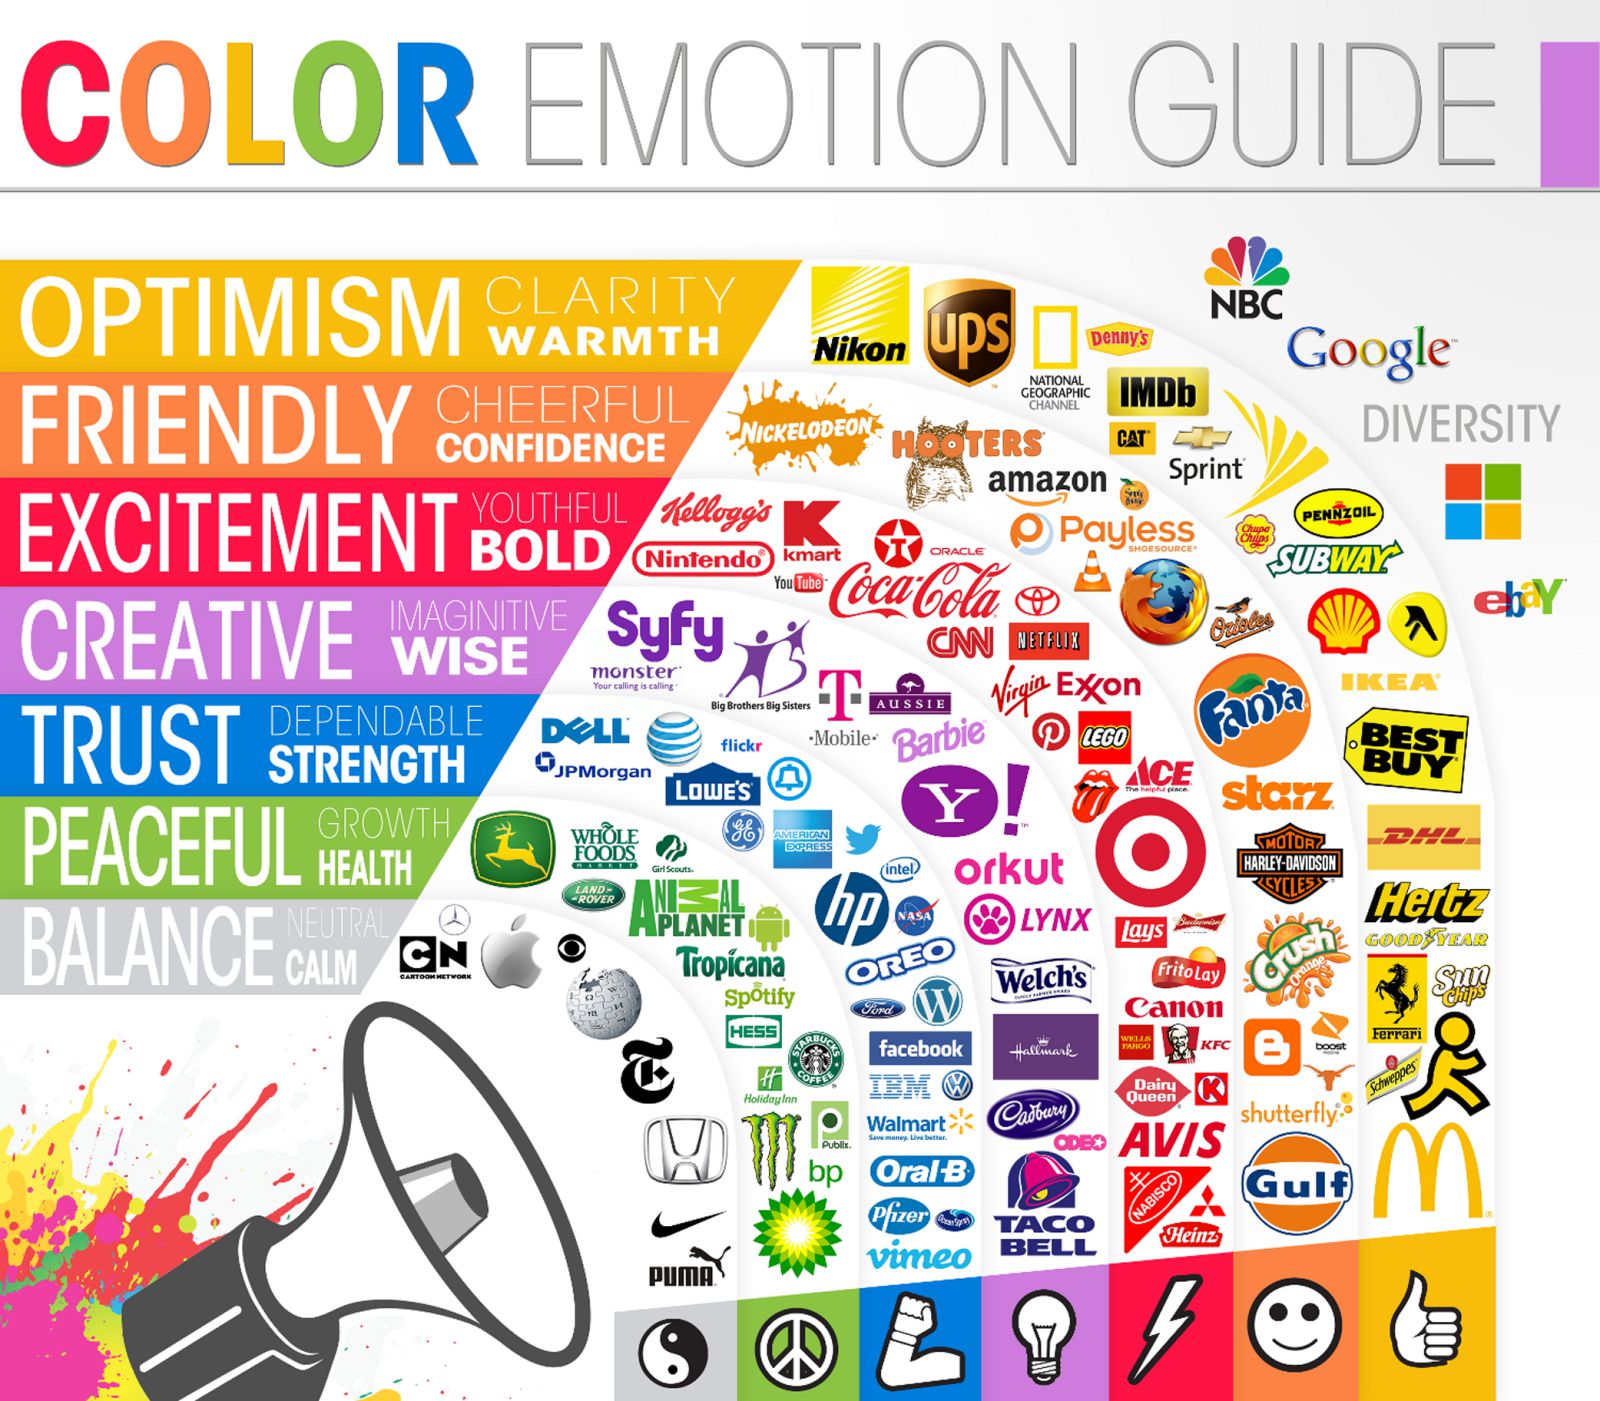 The relationship between brand logos and color